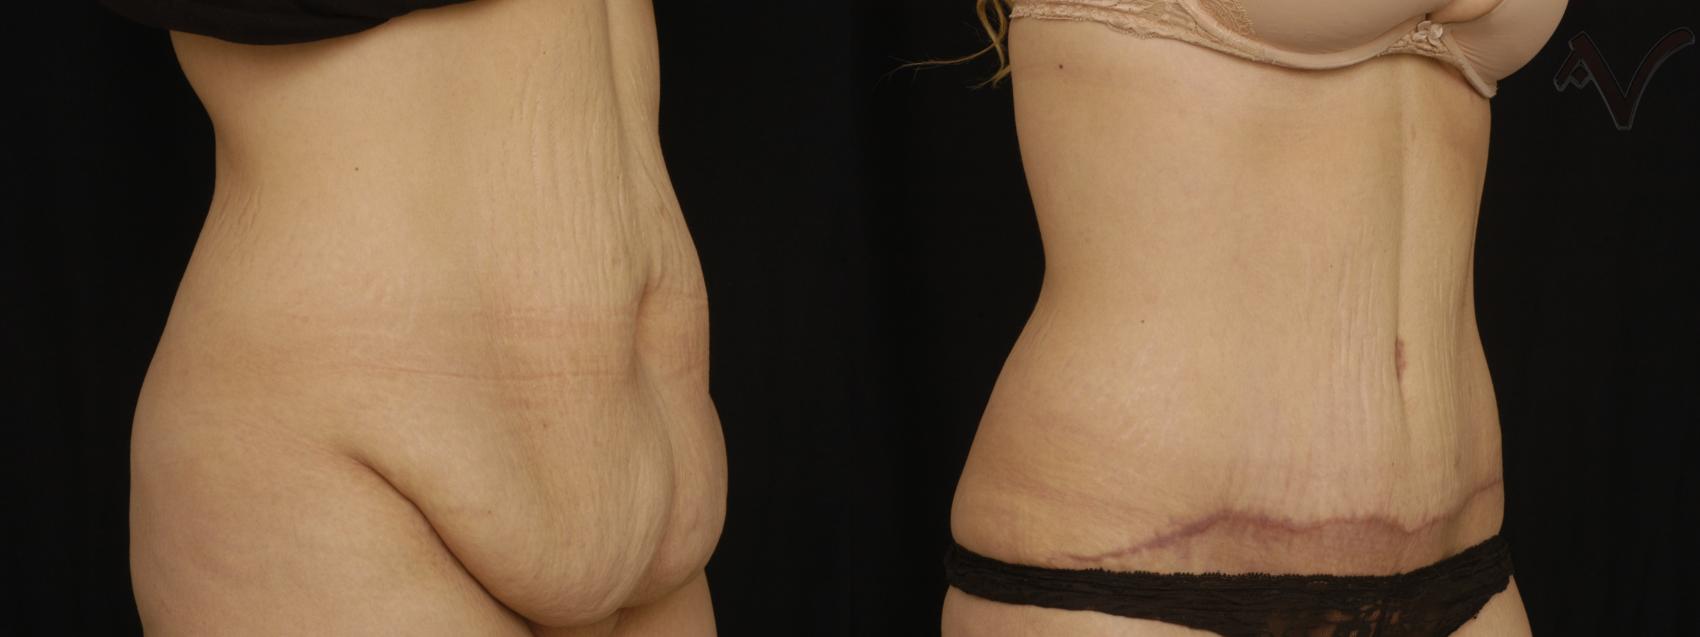 Before & After Abdominoplasty after Massive Weight Loss Case 59 Right Oblique View in Burbank, CA